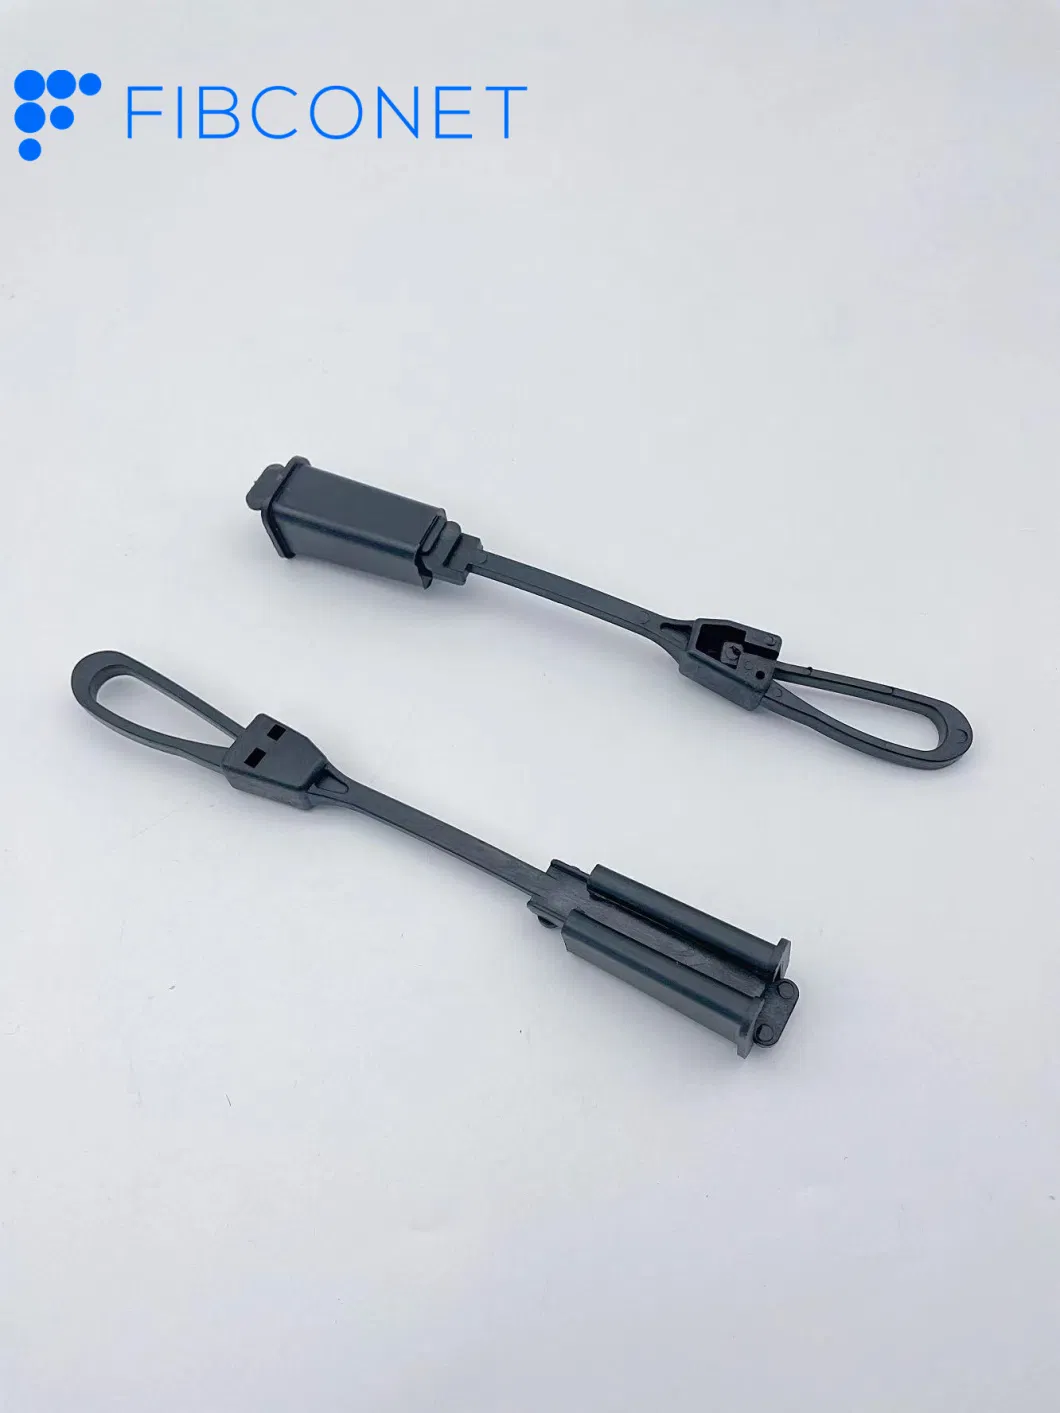 ADSS Wire Clamp 600n Black Nylon Material Cable Tension Clamp for Fiber Optic Cable